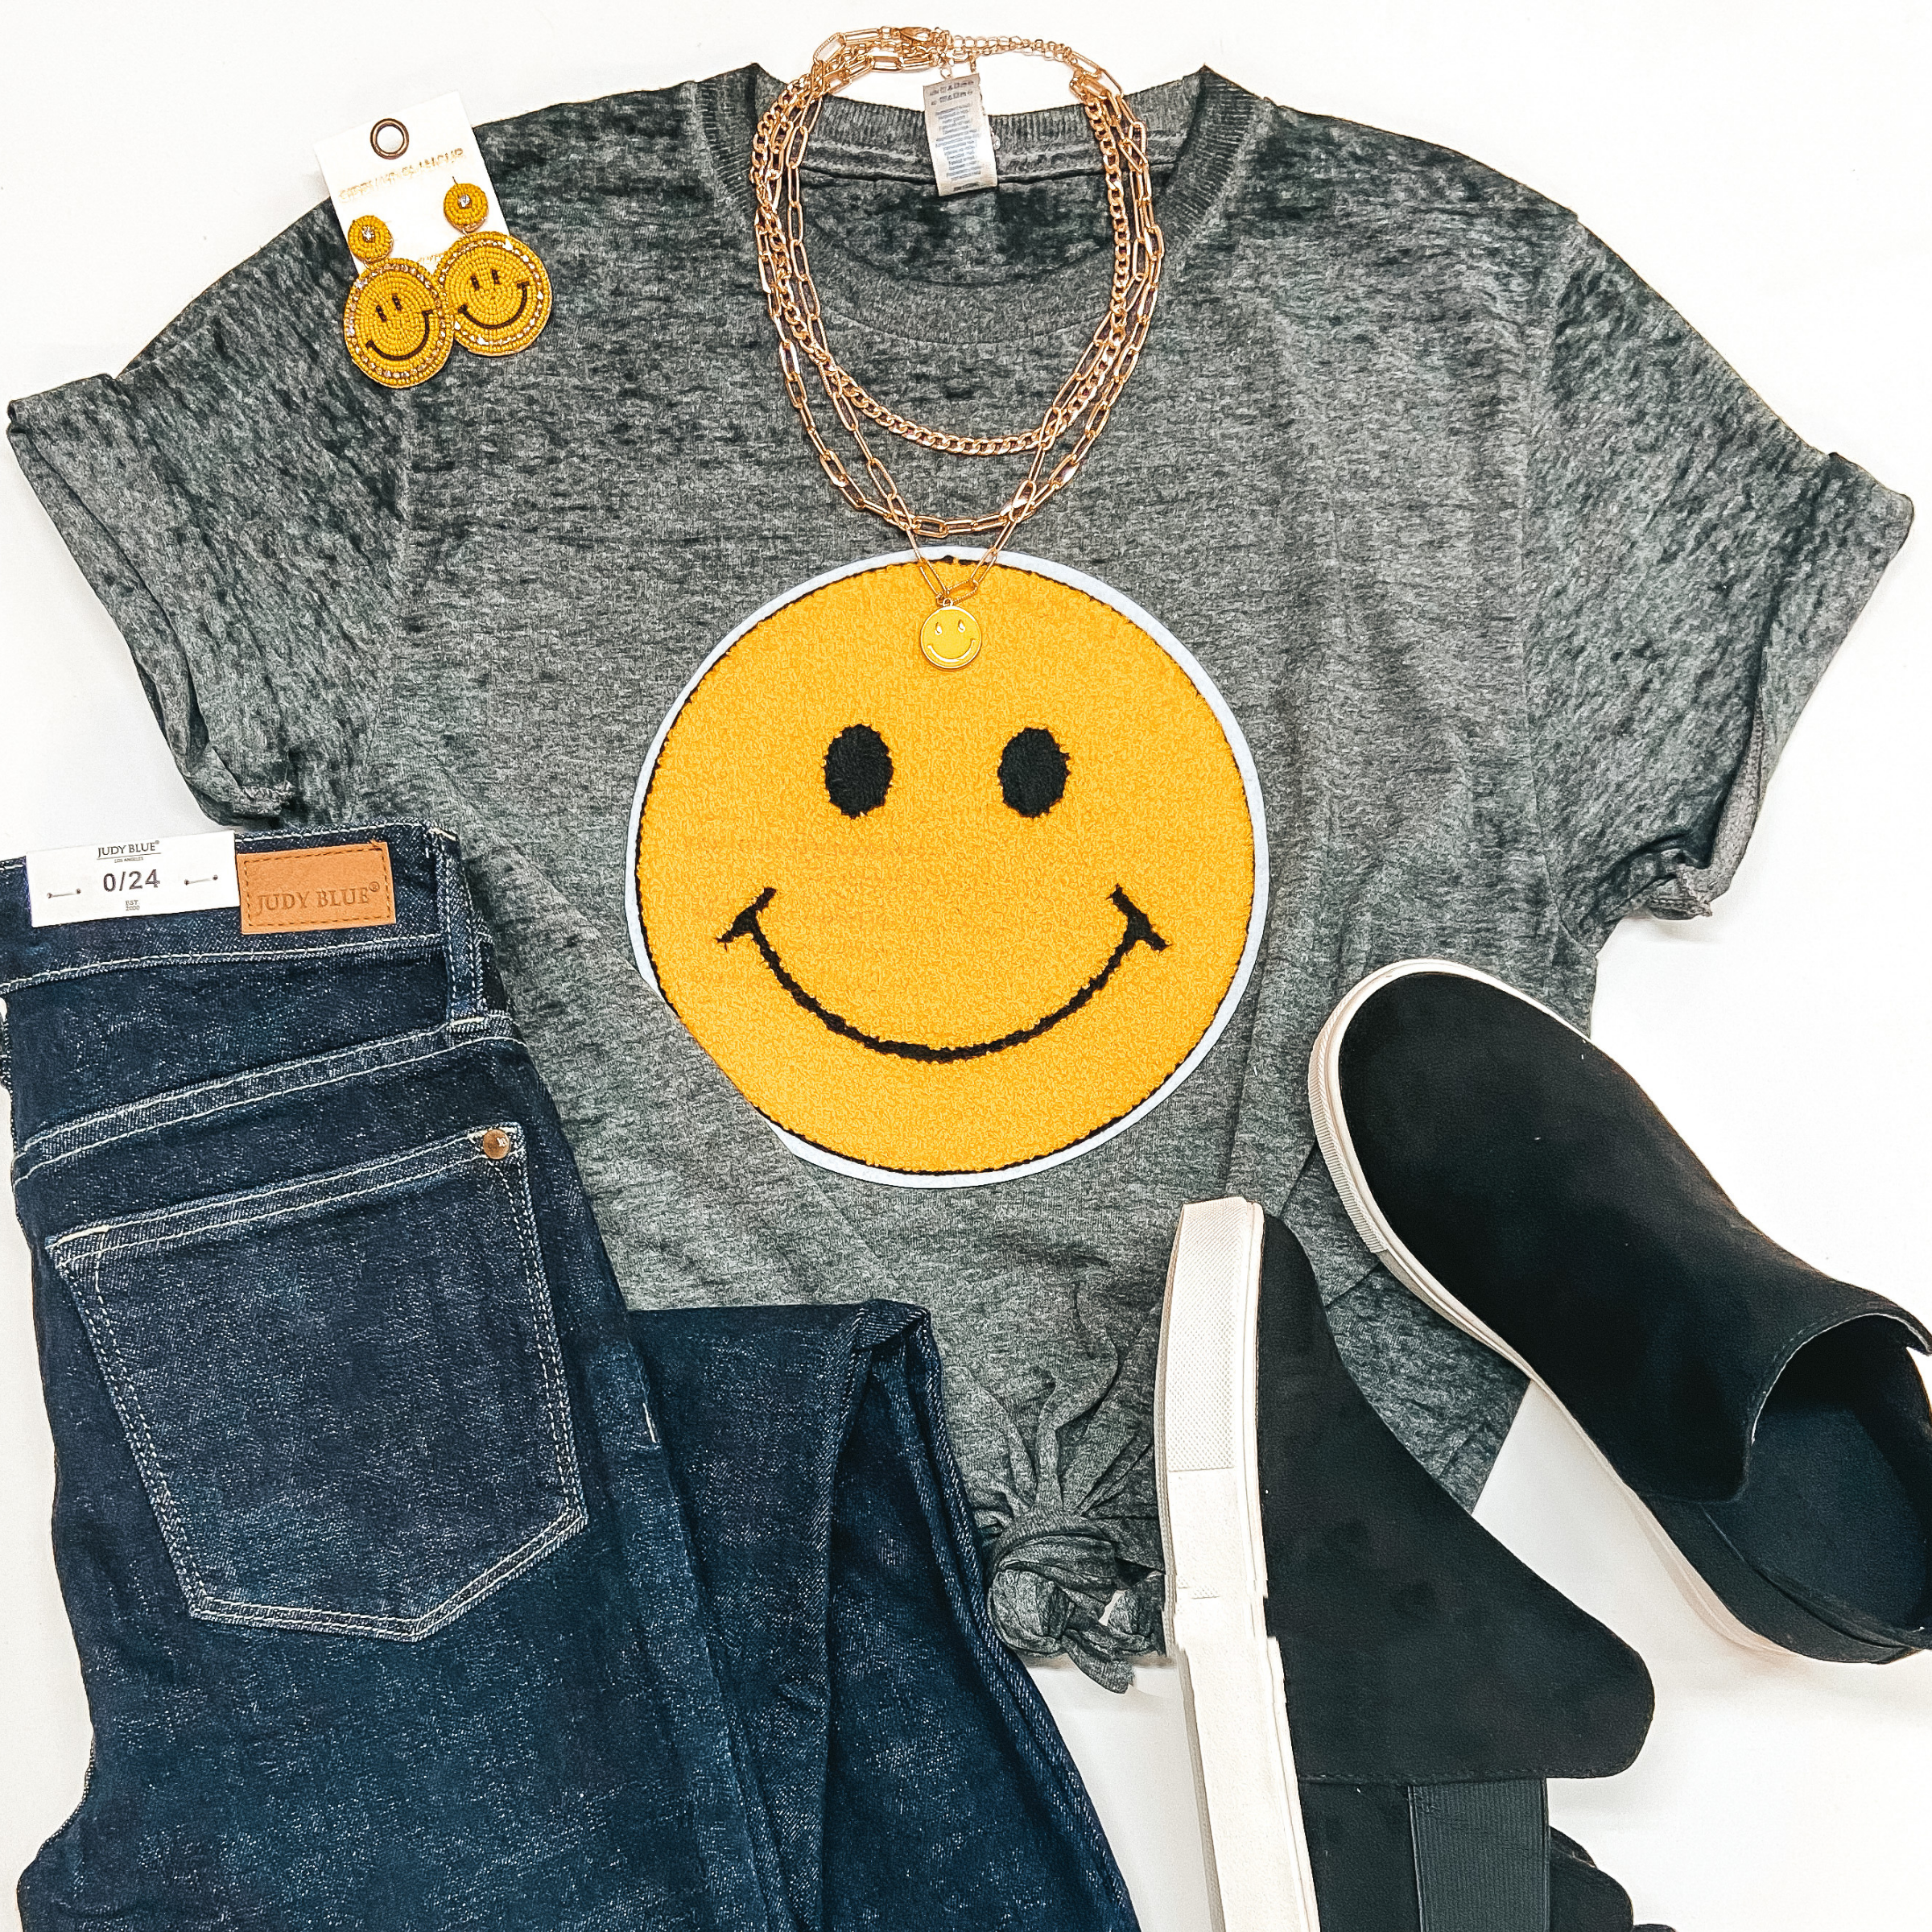 Fuzzy Patch Smiley Face Graphic on Grey Acid wash tee. Pictured with skinny jeans, black heeled sneakers, and smiley face jewelry